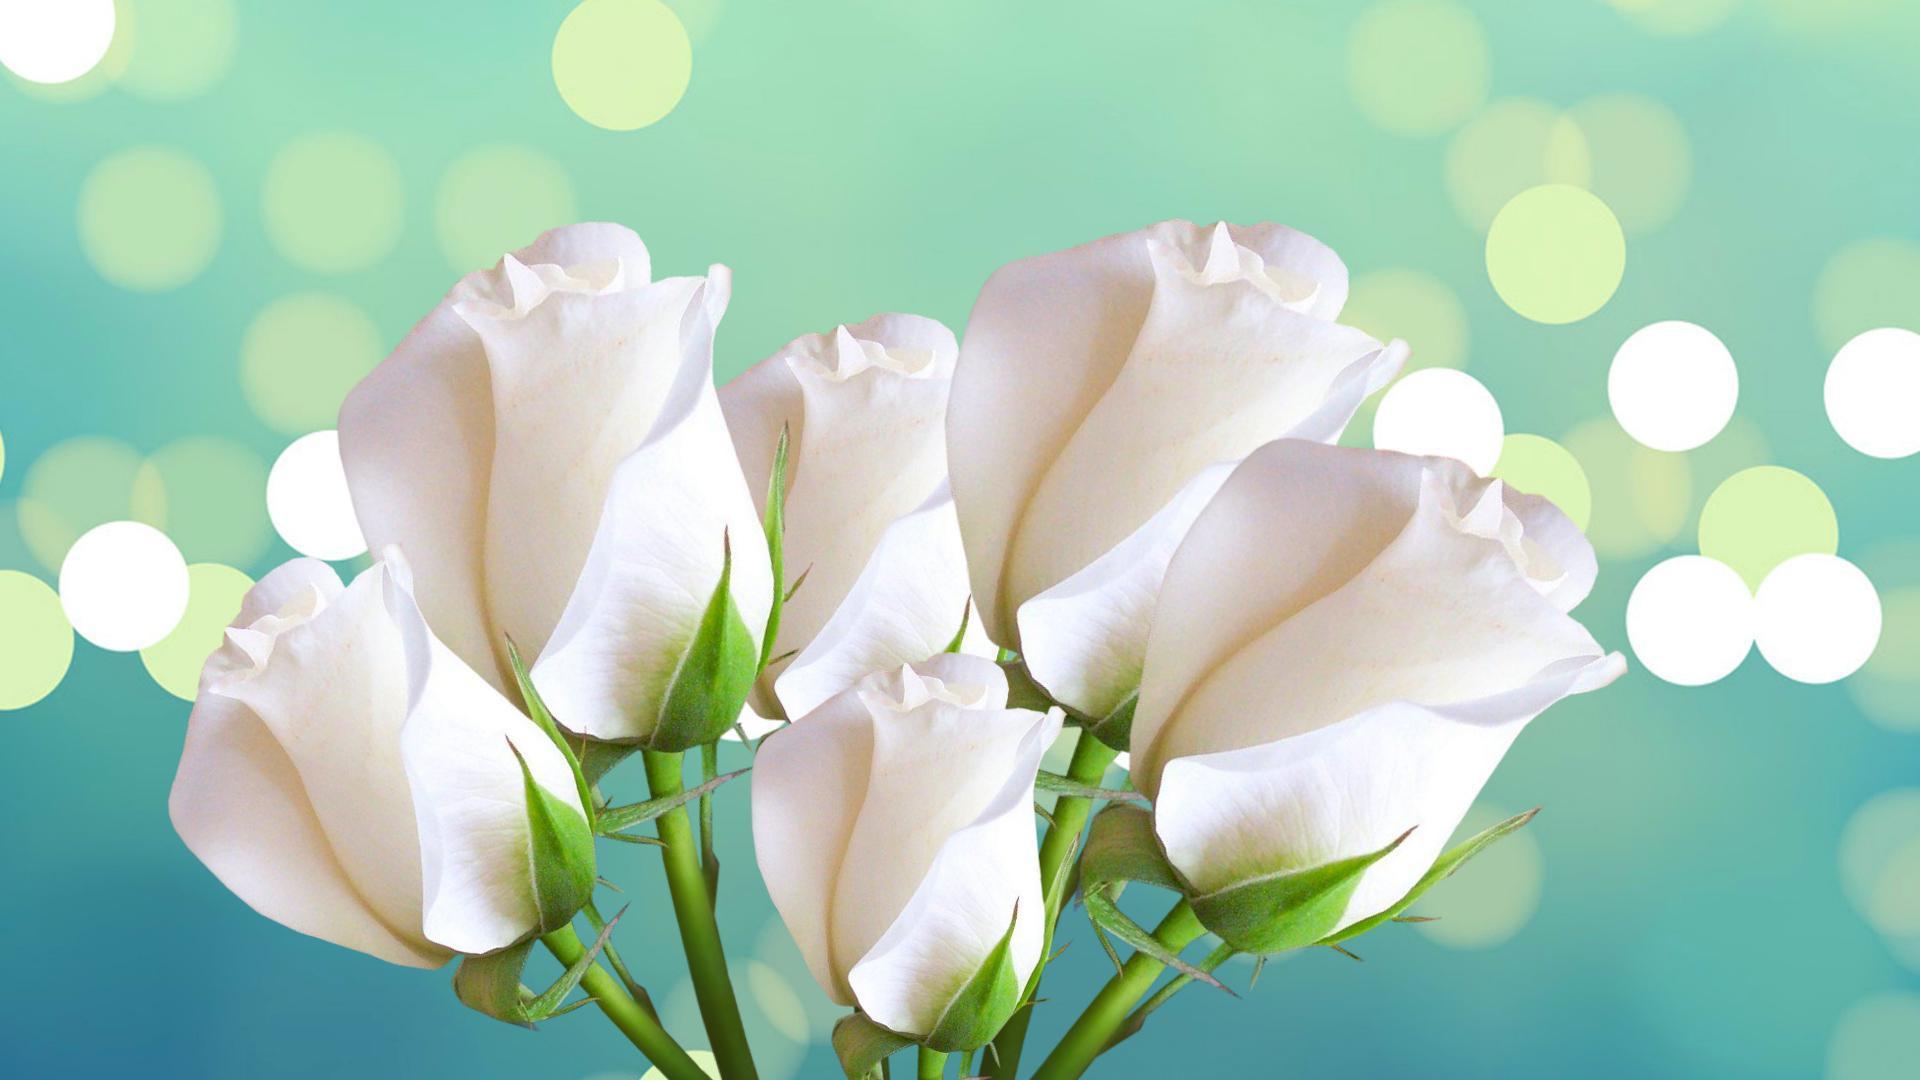 white roses on a blue background for women on March 8 wallpapers